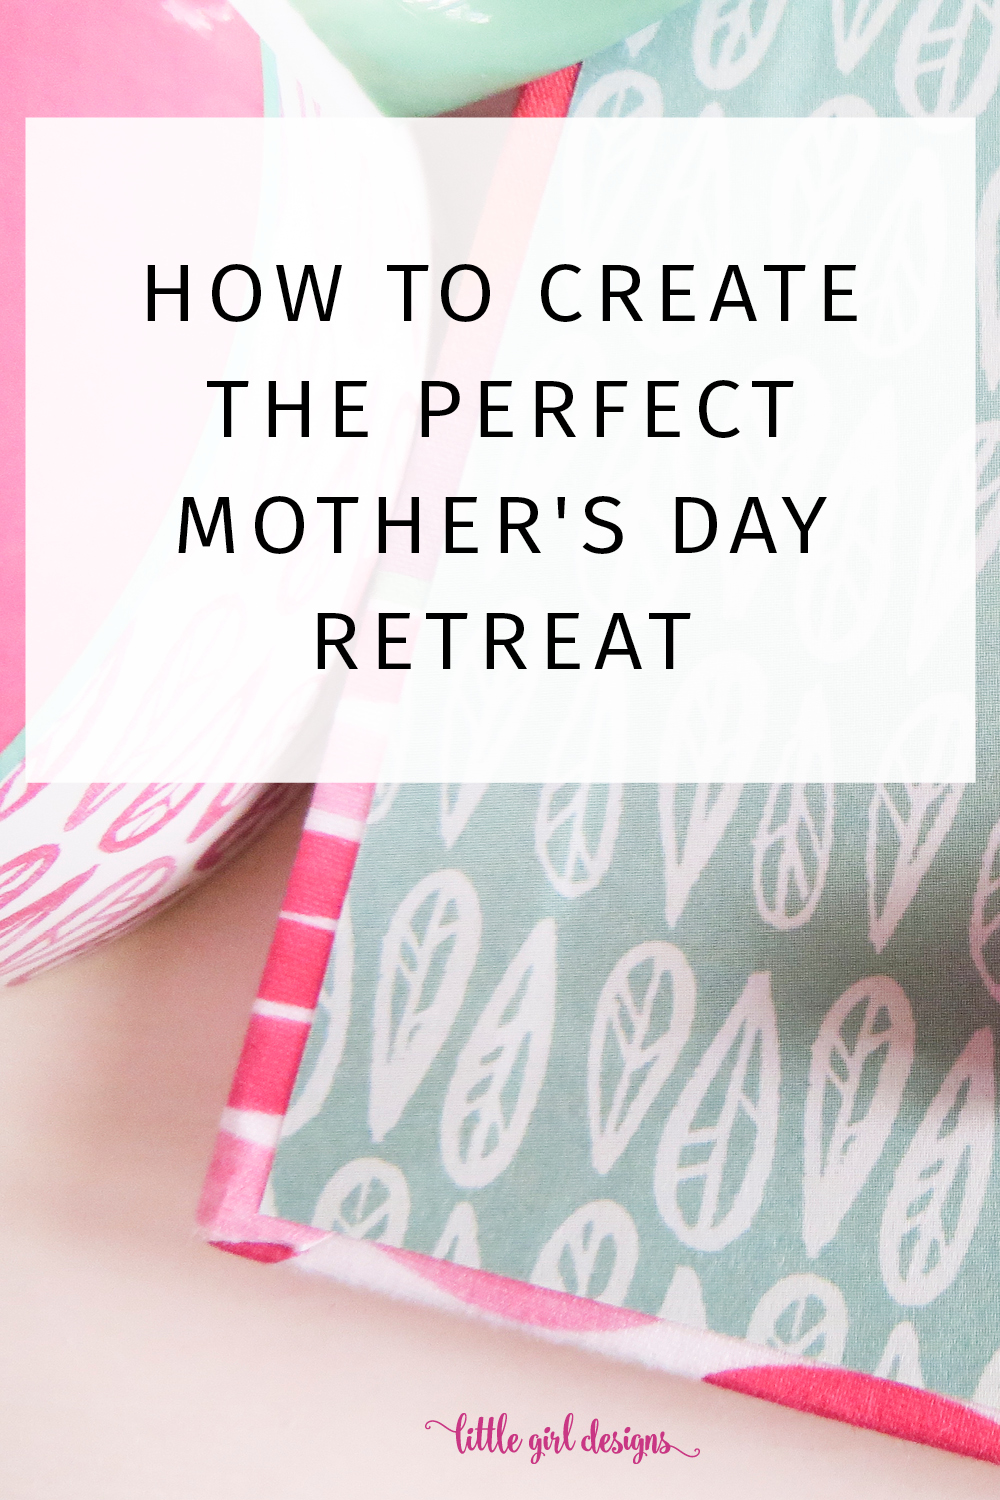 How to Create the Perfect Mother’s Day Retreat